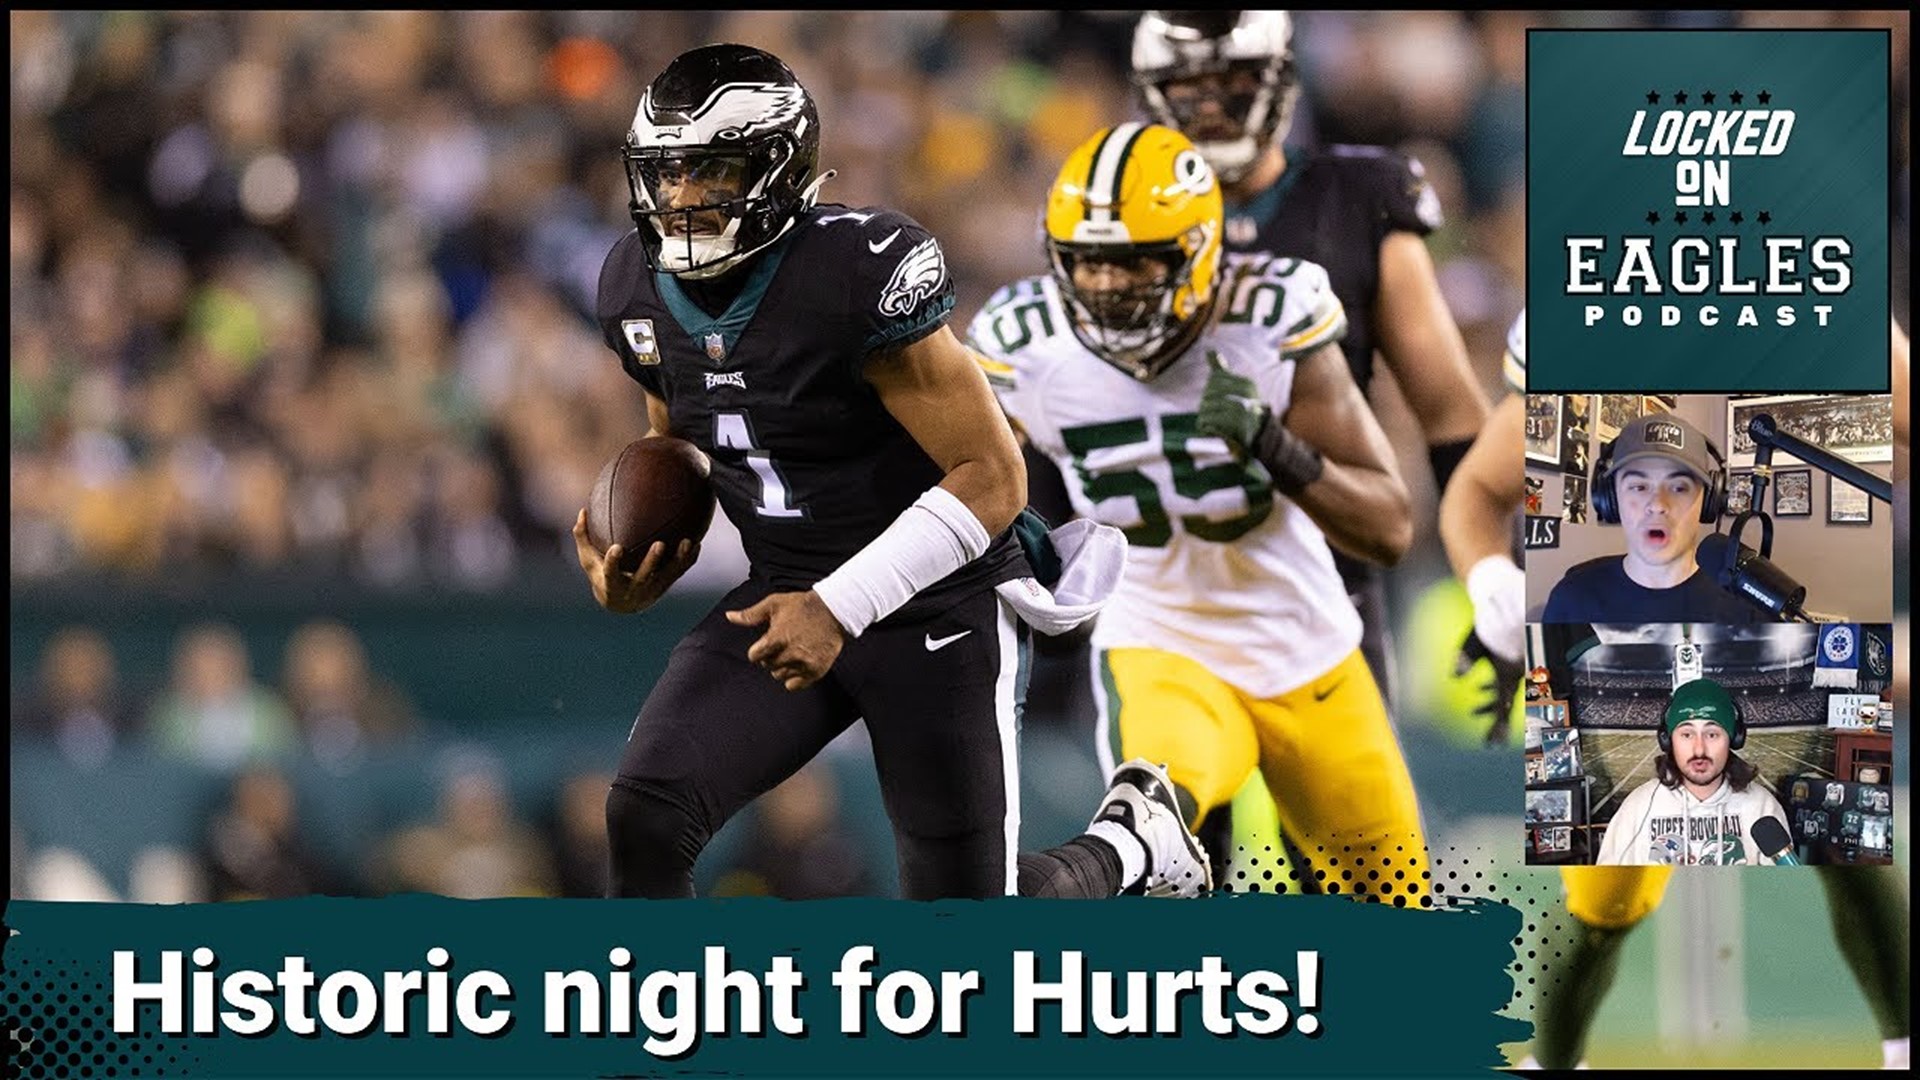 Next man up' mentality helps lead Philadelphia over Green Bay in Sunday  night win, Locked On Eagles